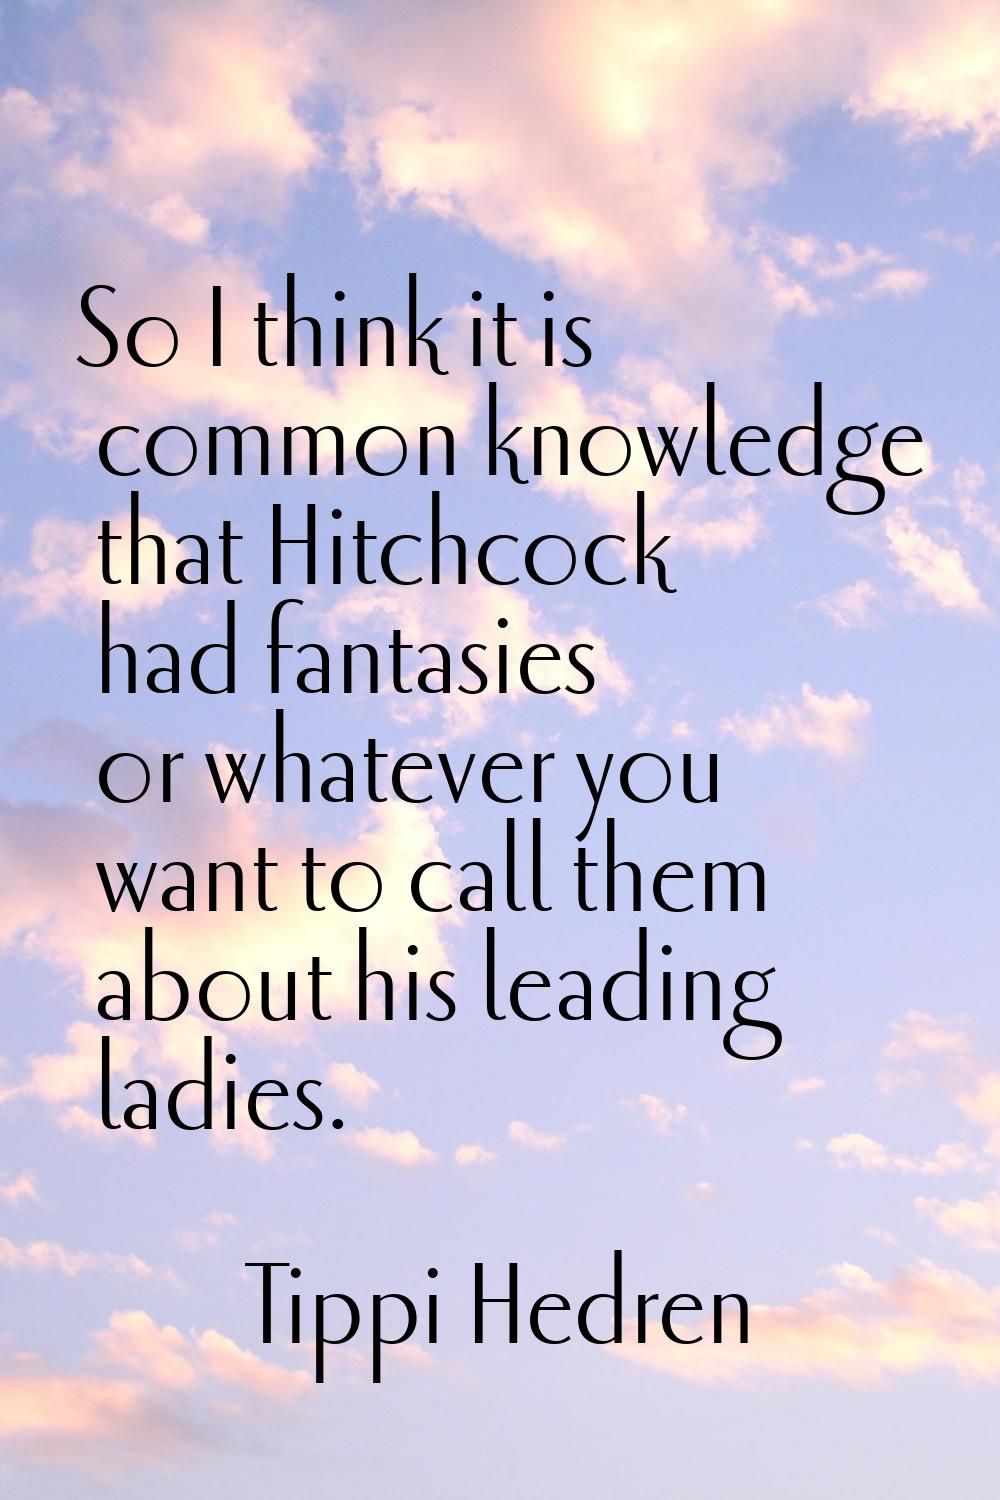 So I think it is common knowledge that Hitchcock had fantasies or whatever you want to call them ab